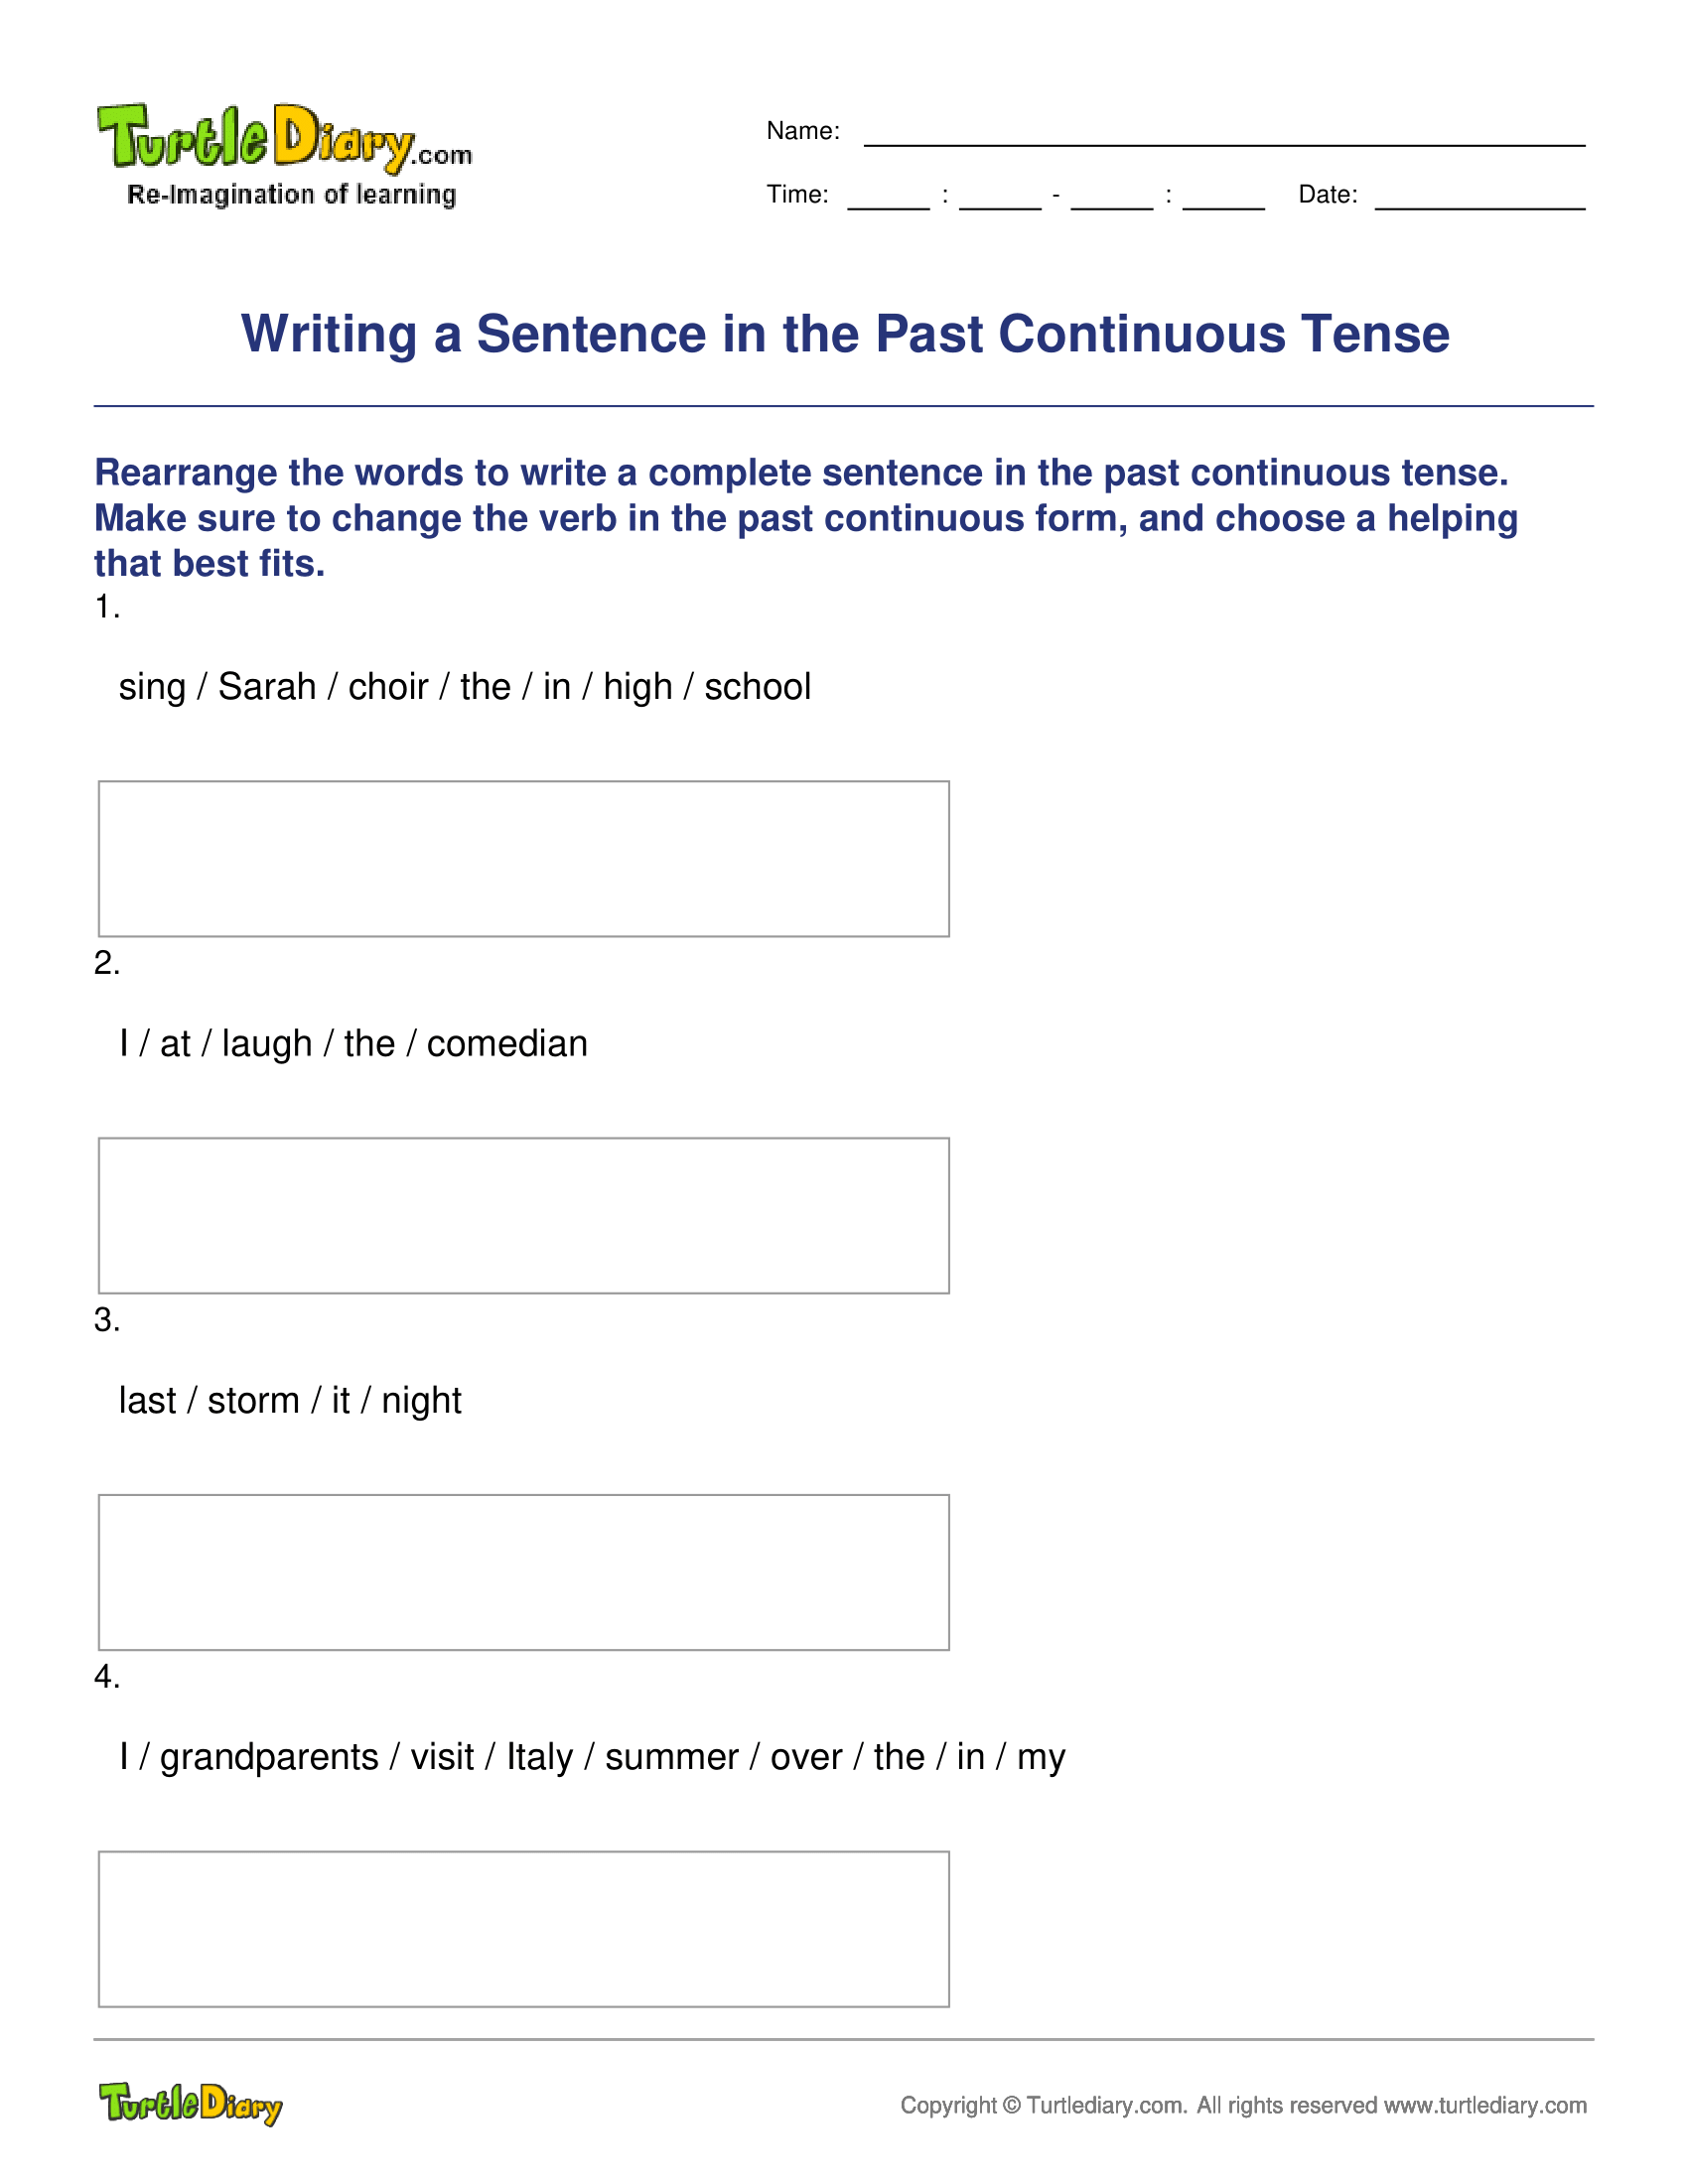 Writing a Sentence in the Past Continuous Tense